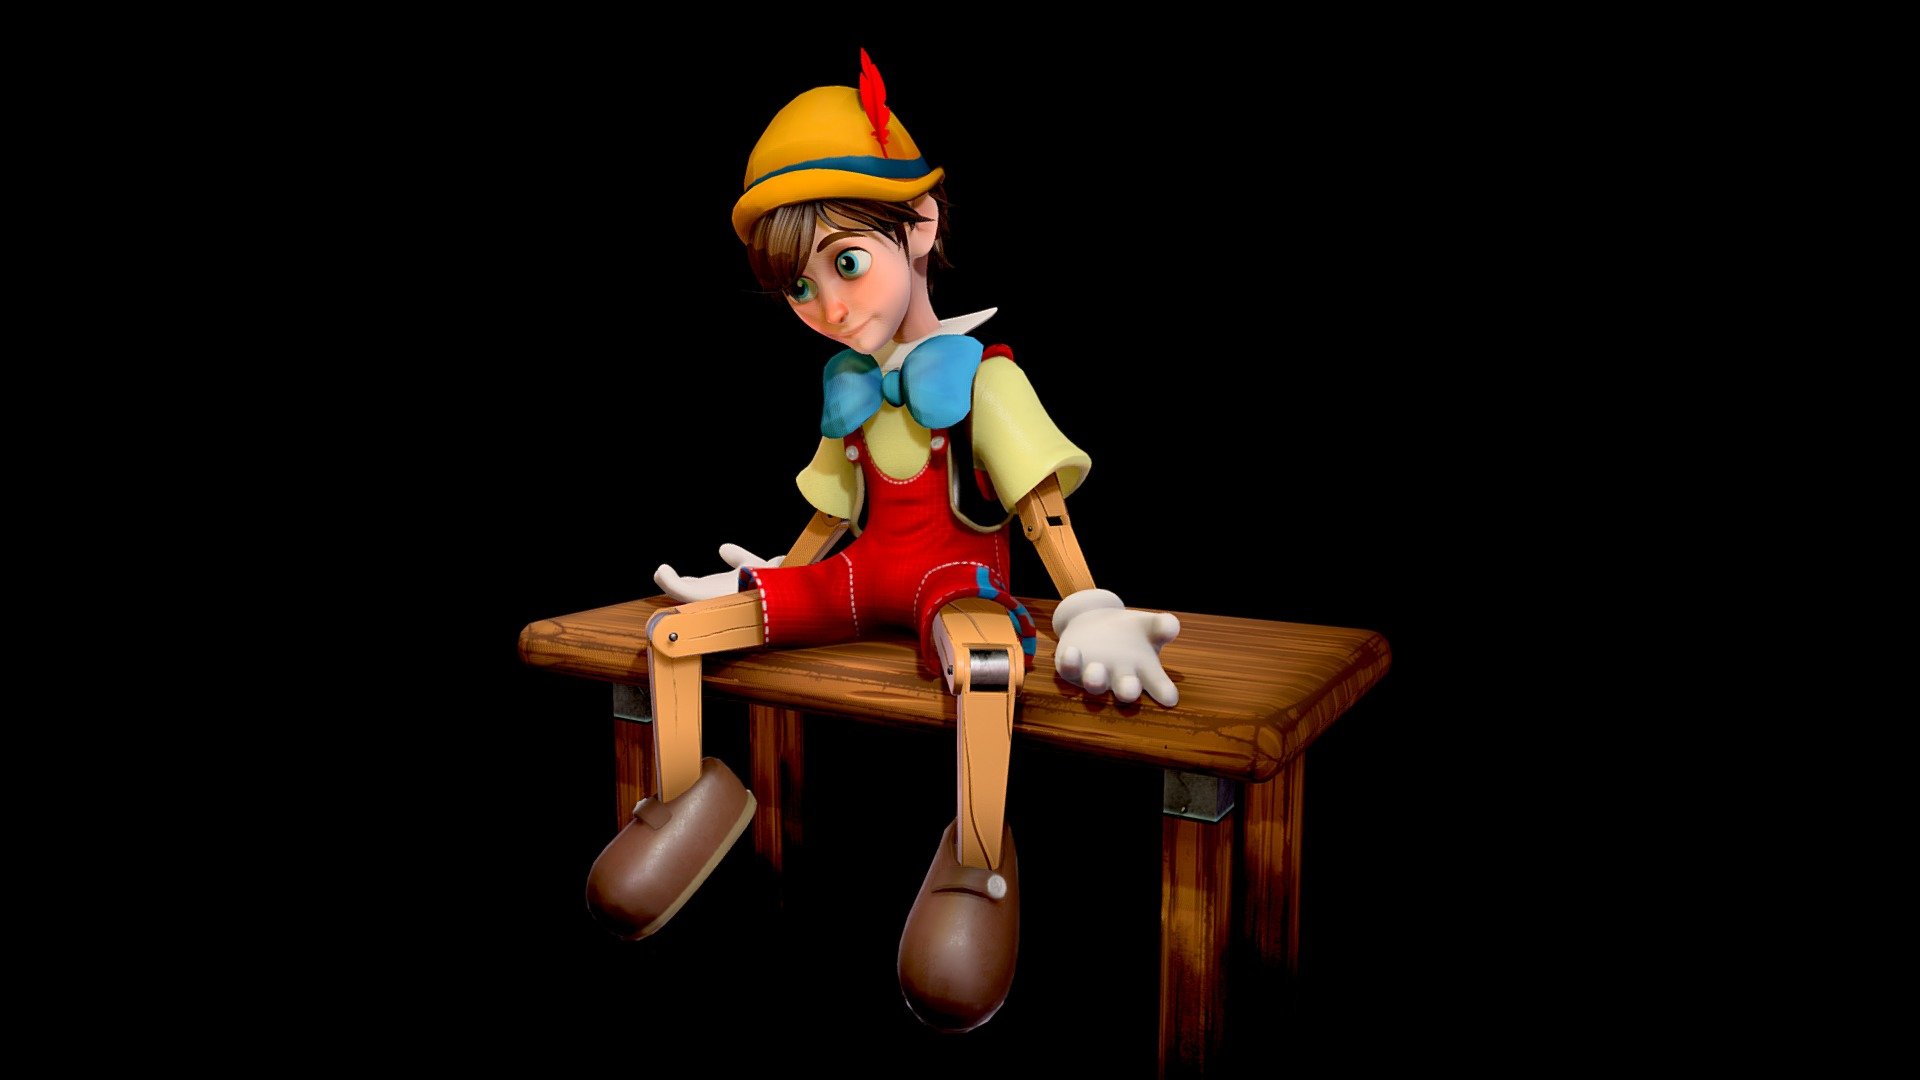 Long ago in Italy there lived on old clock-maker named Geppetto. Tick-tick-TOCK! Tick-tick-TOCK! went all the clocks in his shop. When he worked, Geppetto felt happy. But when he rested, a sad feeling came over him. “Ah!” he would think. “All my life and no child to call my own!”  So, one day Geppetto carved a puppet from wood in the shape of a boy. Pinocchio.

This is one of my long favorite Disney movies of all times. In this model i try to give my own vision to the model and using a Pixar style for it. 

Hope you love it as much as i do 3d model